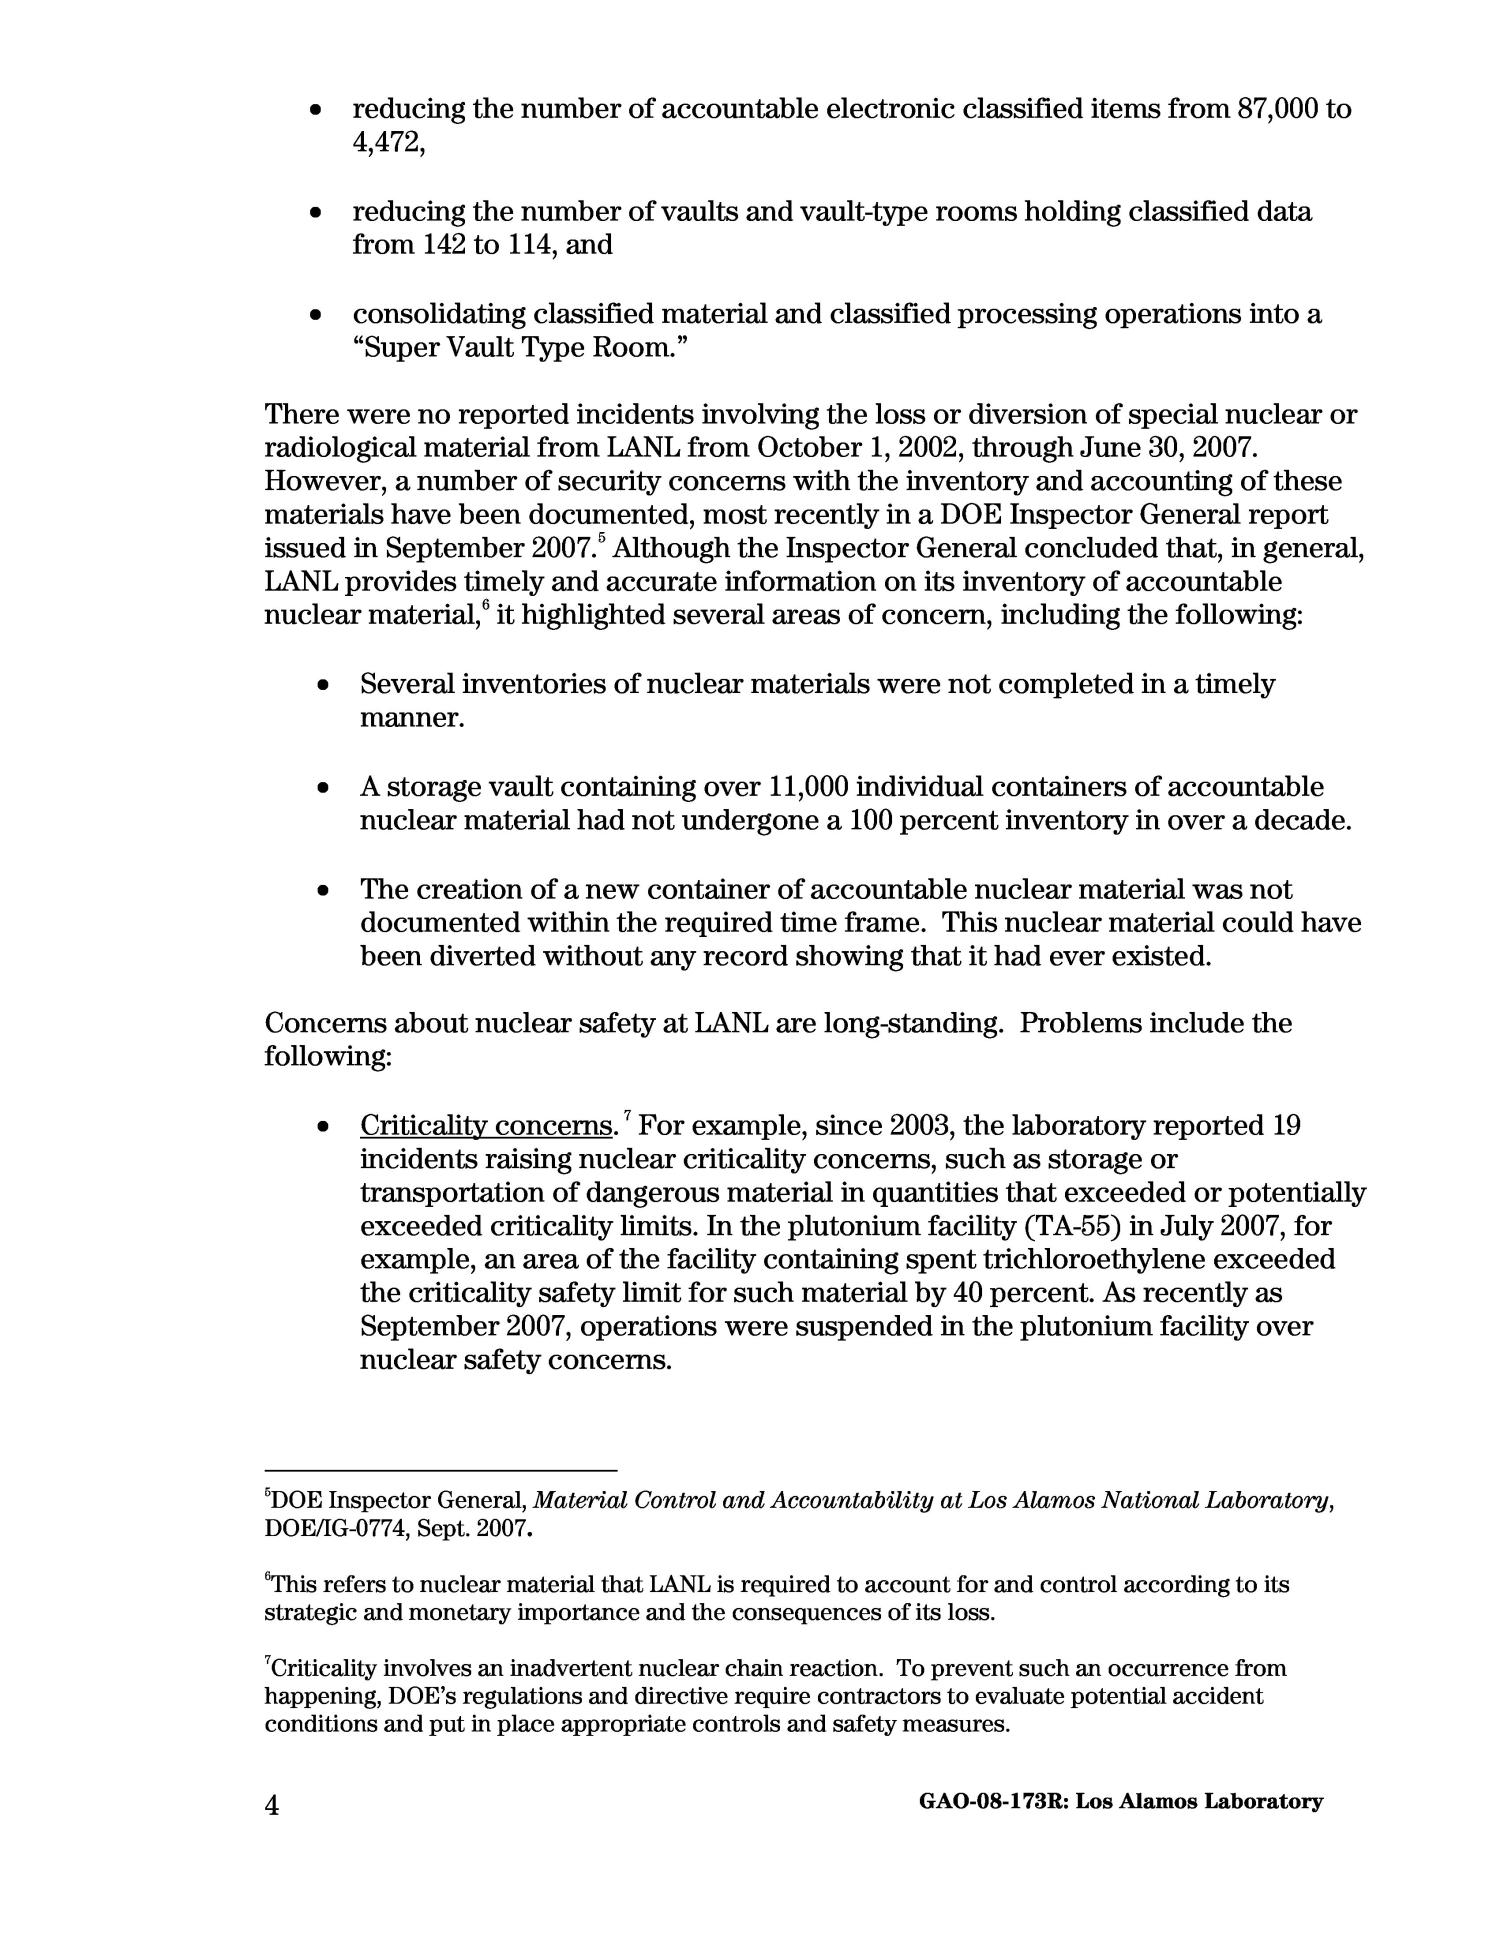 Los Alamos National Laboratory: Information on Security of Classified Data, Nuclear Material Controls, Nuclear and Worker Safety, and Project Management Weaknesses
                                                
                                                    [Sequence #]: 4 of 61
                                                